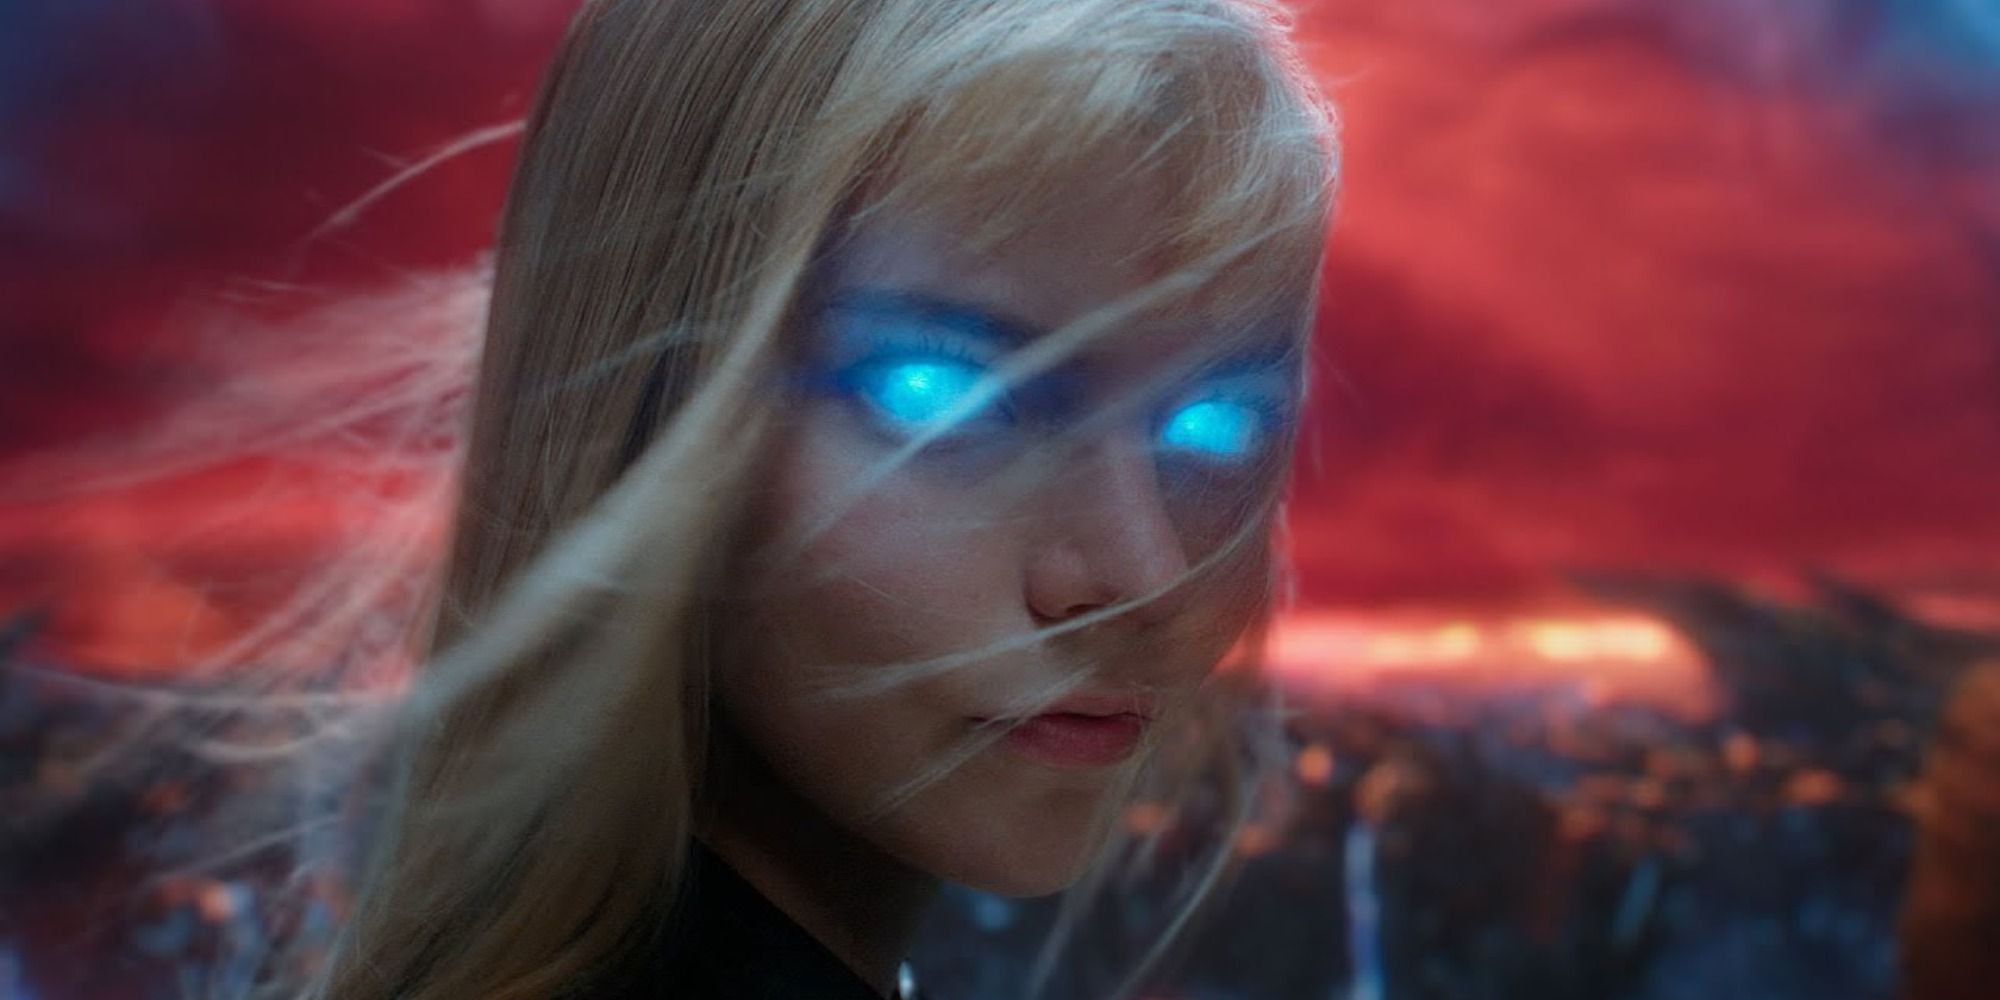 Magik uses her powers in The New Mutants movie.